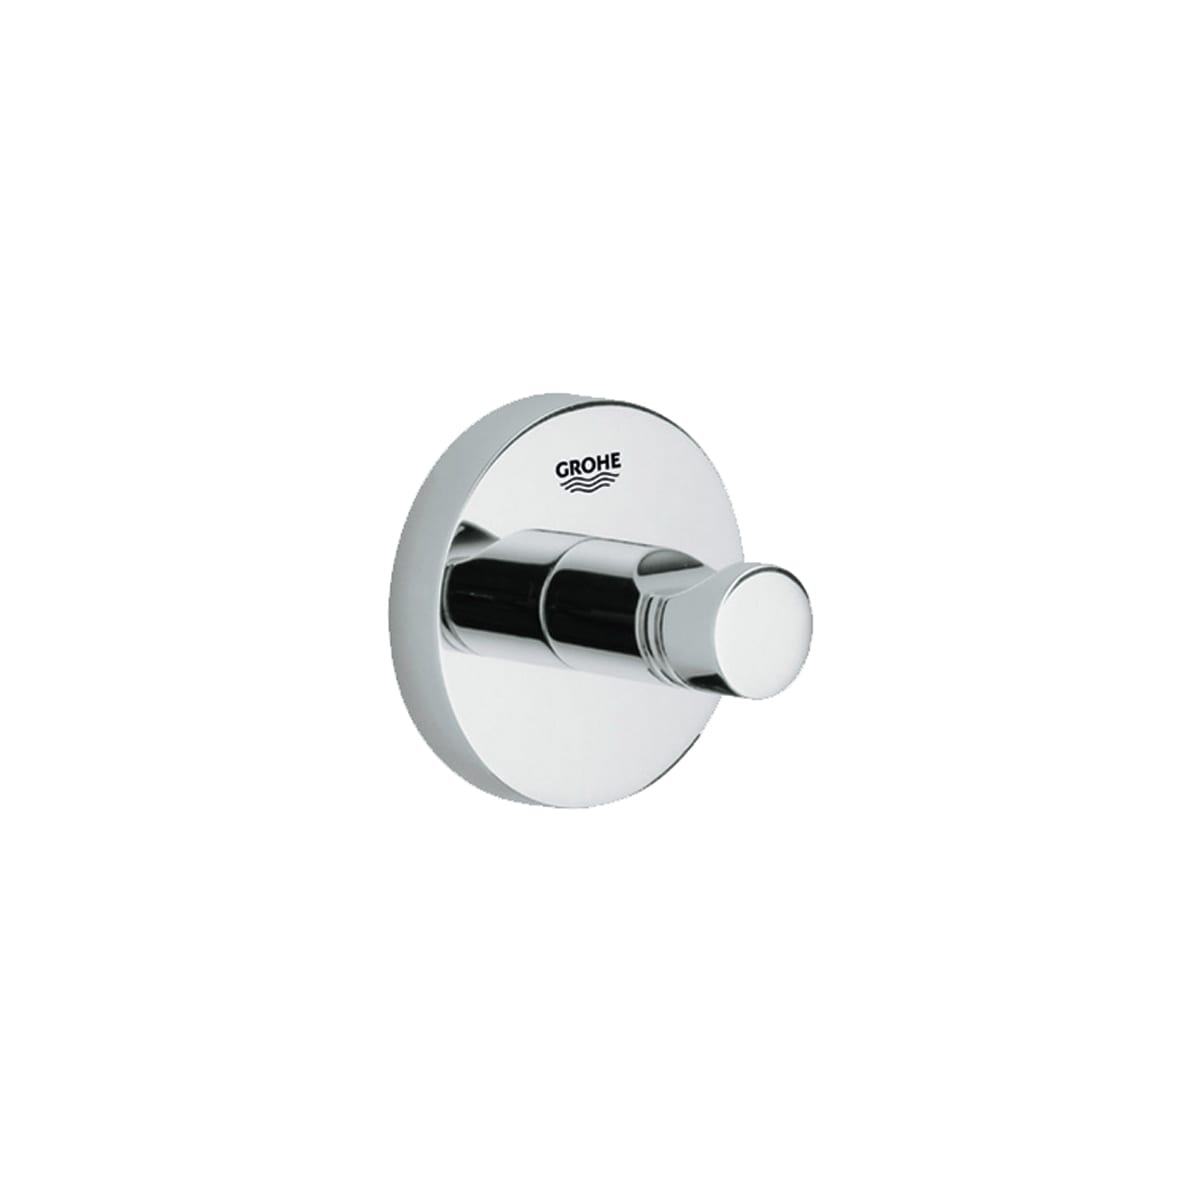 Grohe Essentials Chrome Robe Hook 40364           Brand New In Box 